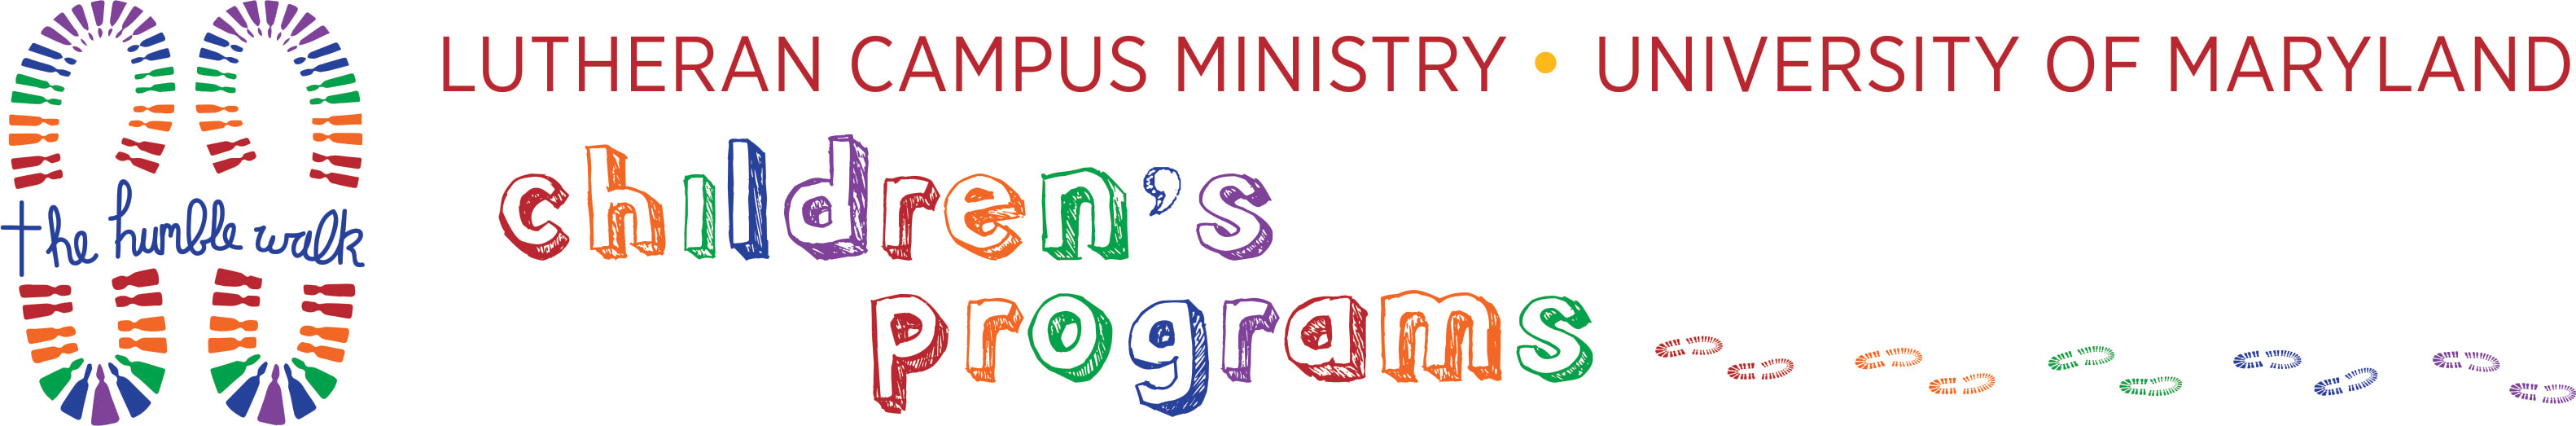 Lutheran Campus Ministry • The Humble Walk • Children's Programs -- Multi-Media Header Graphic